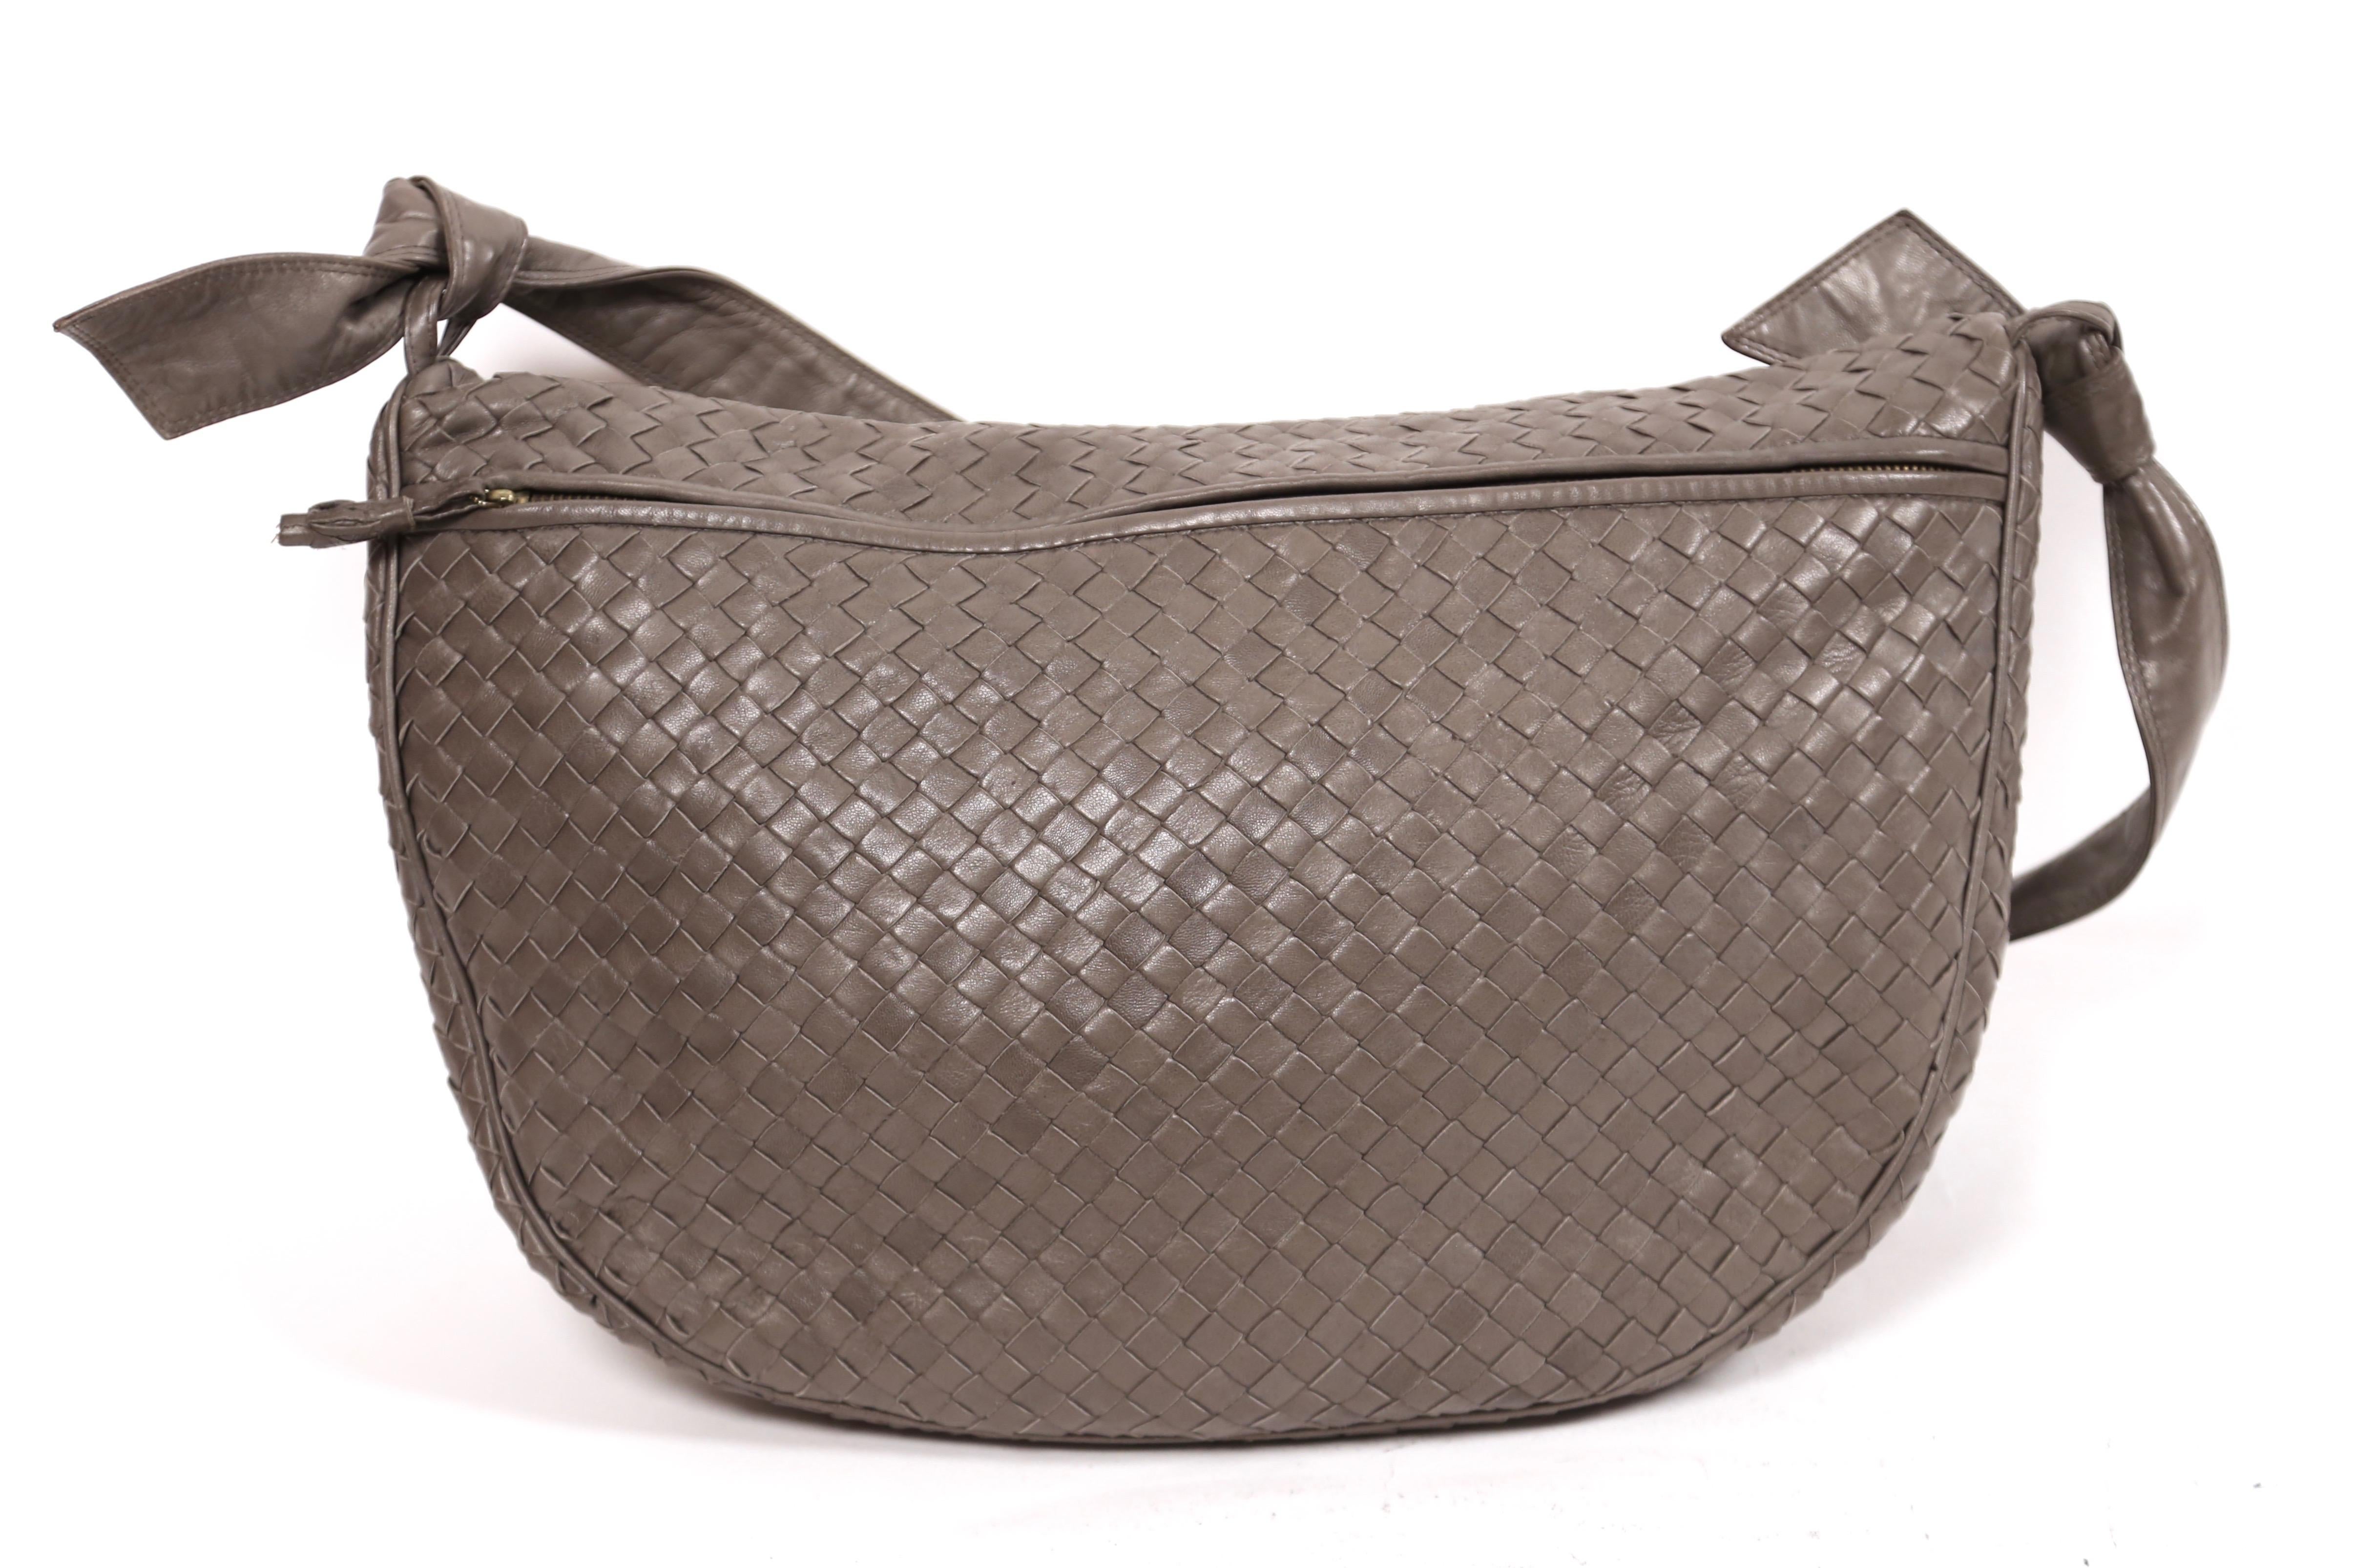 Elephant-Grey woven leather bag from Bottega Veneta dating to the late 1980's. Bag measures approximately 16